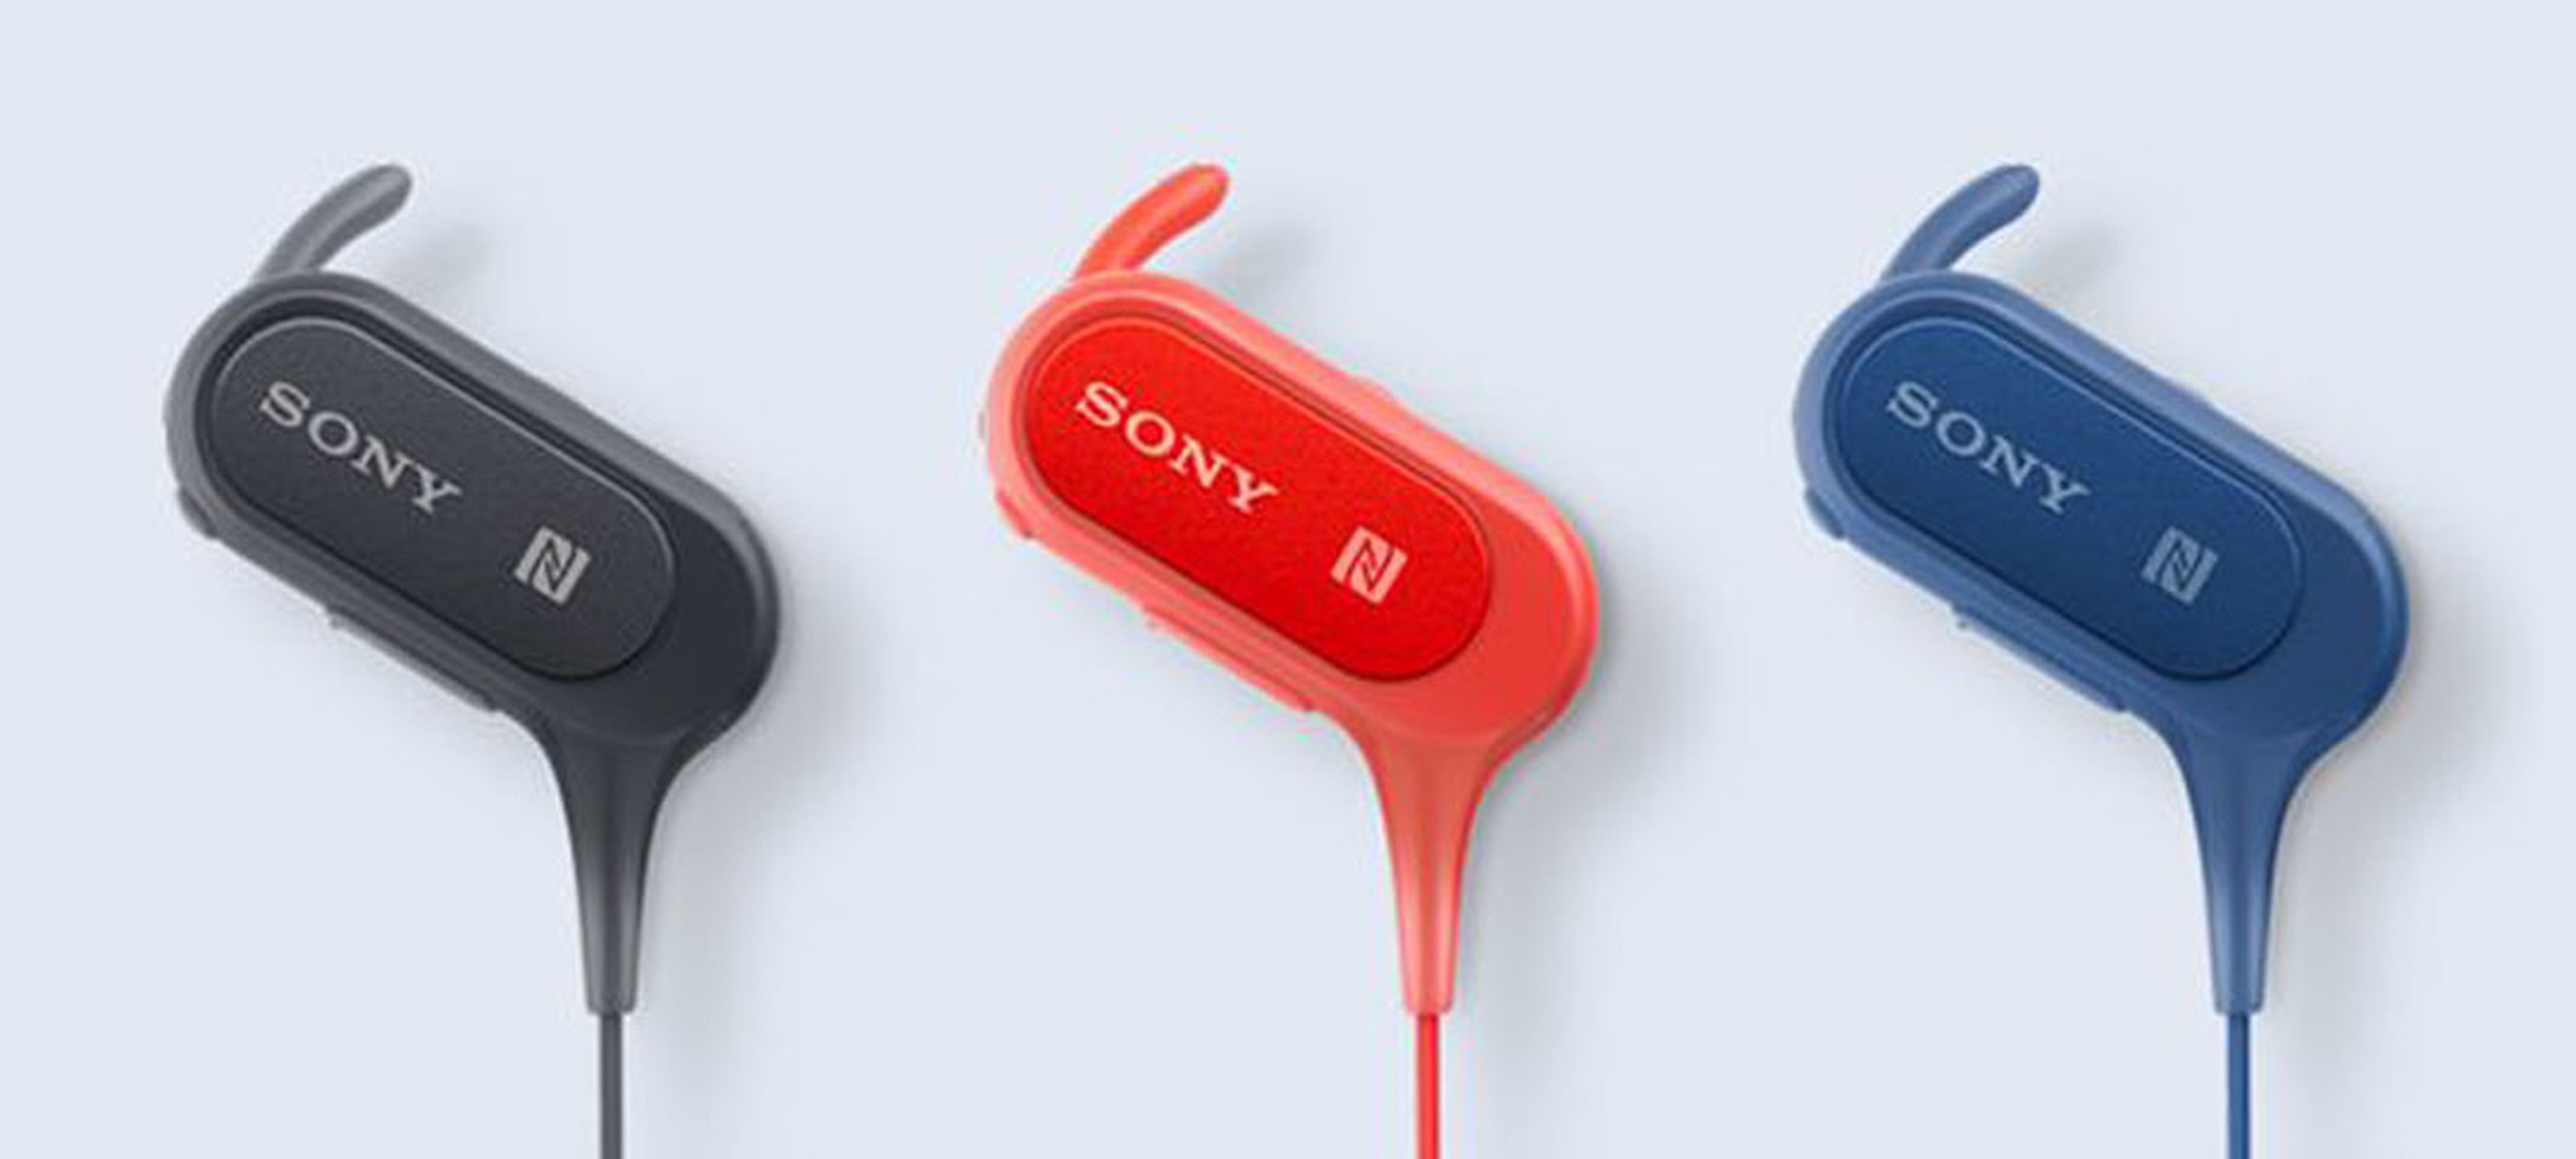 Sony MDR-XB50BS